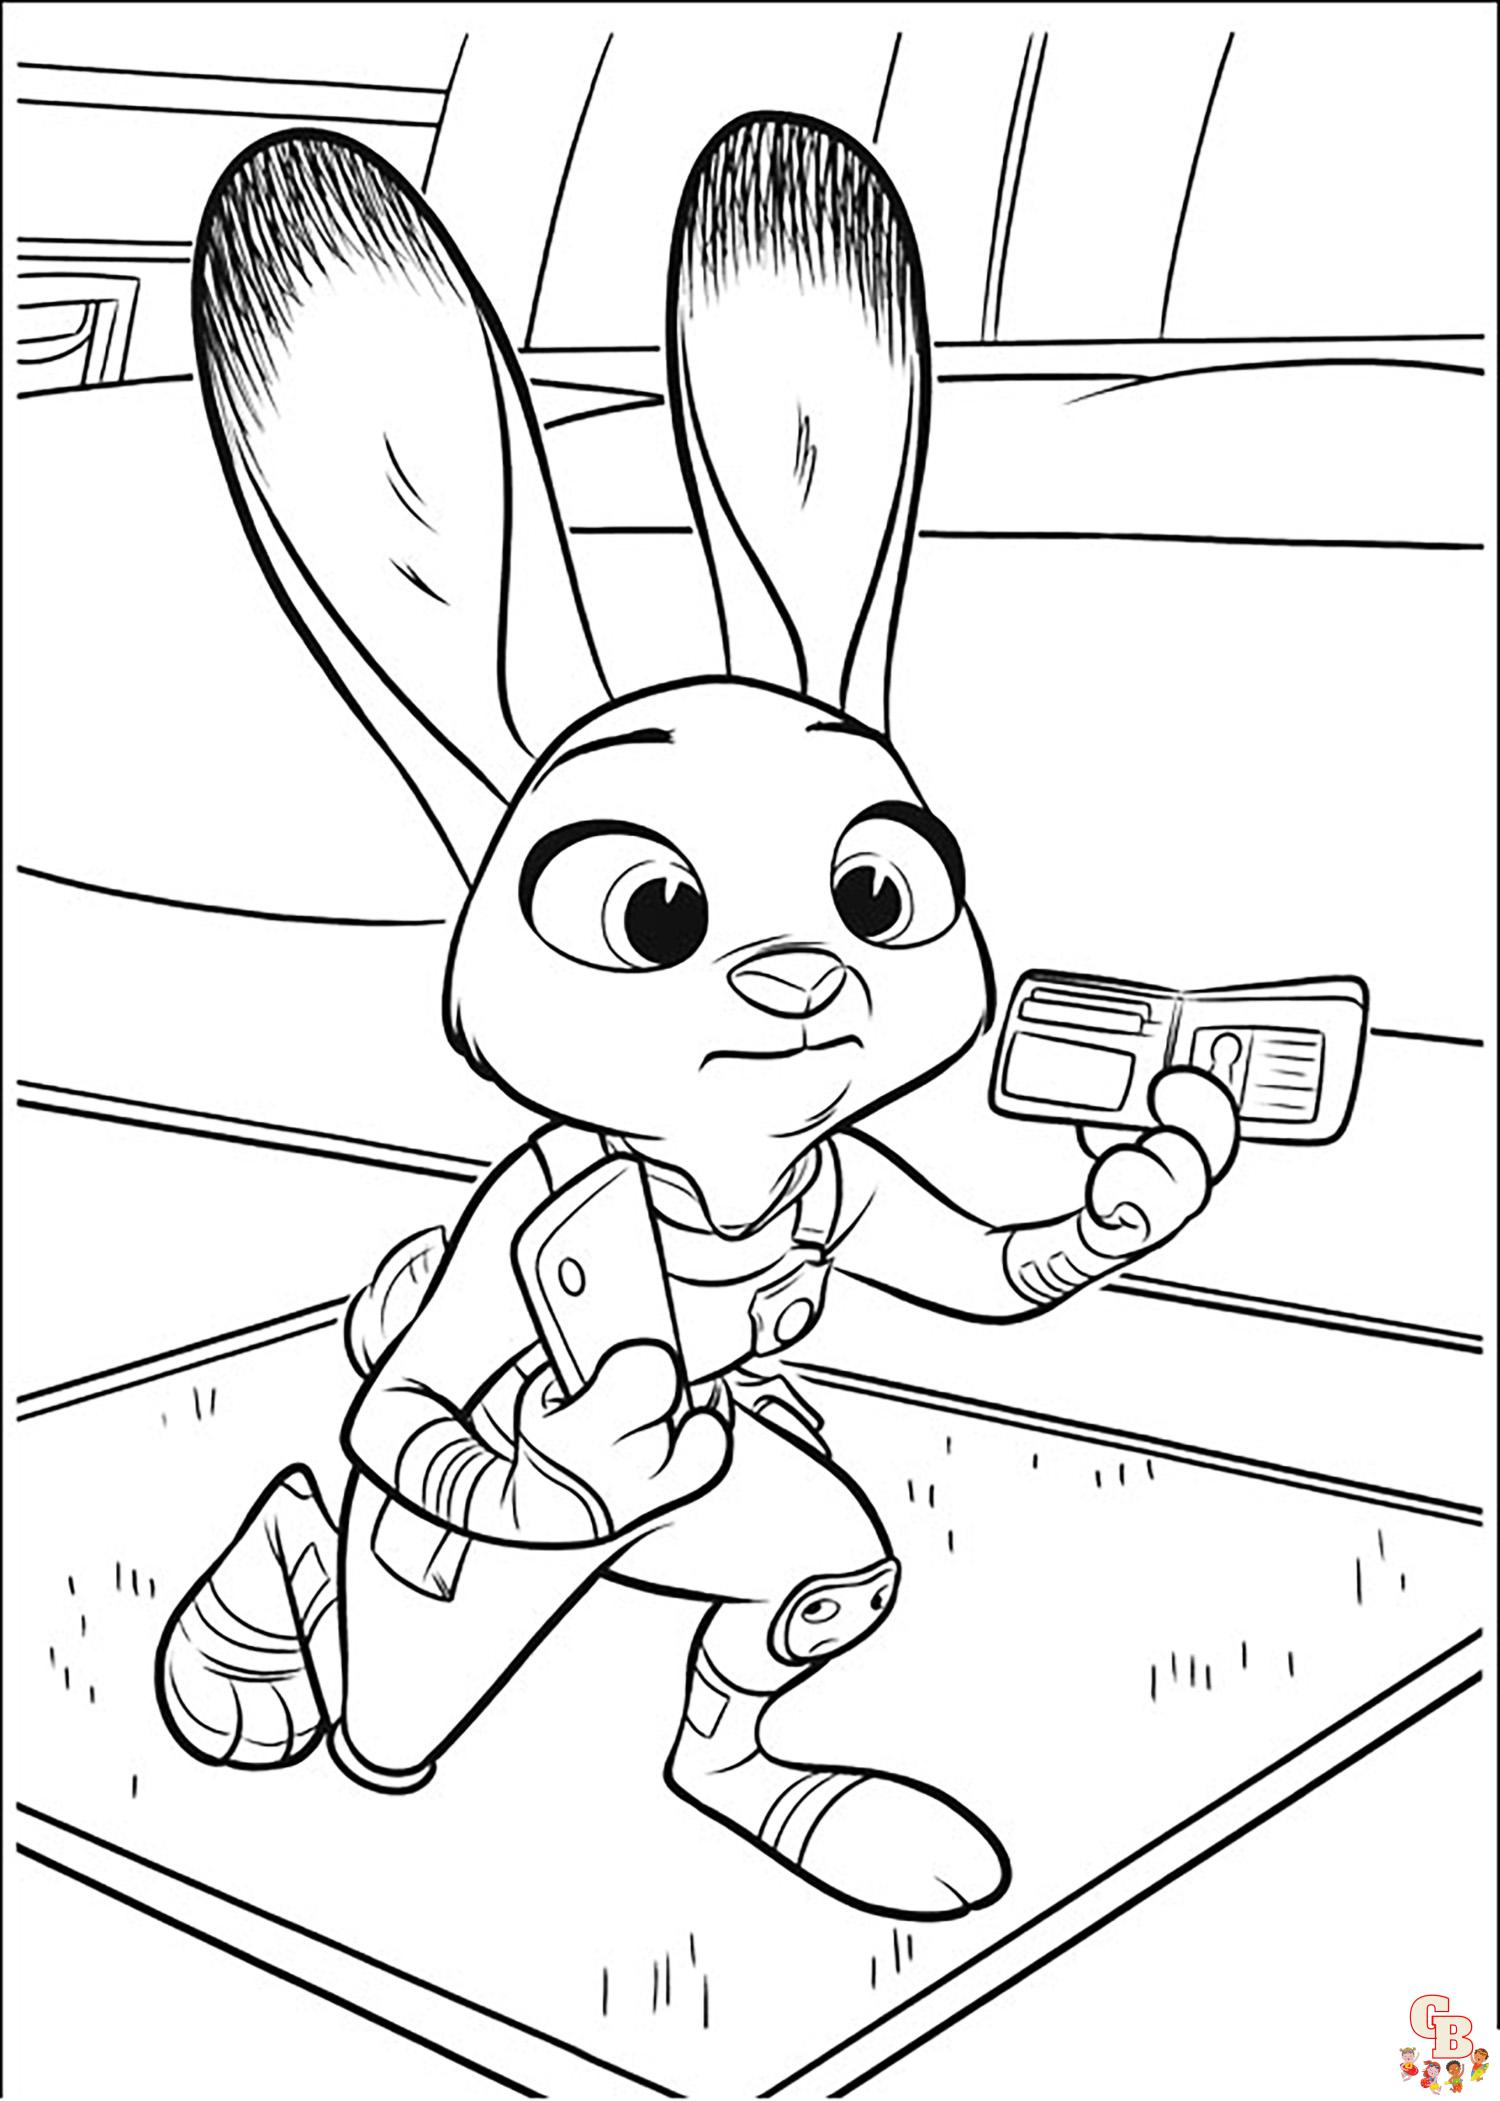 Zootopia Coloring Pages